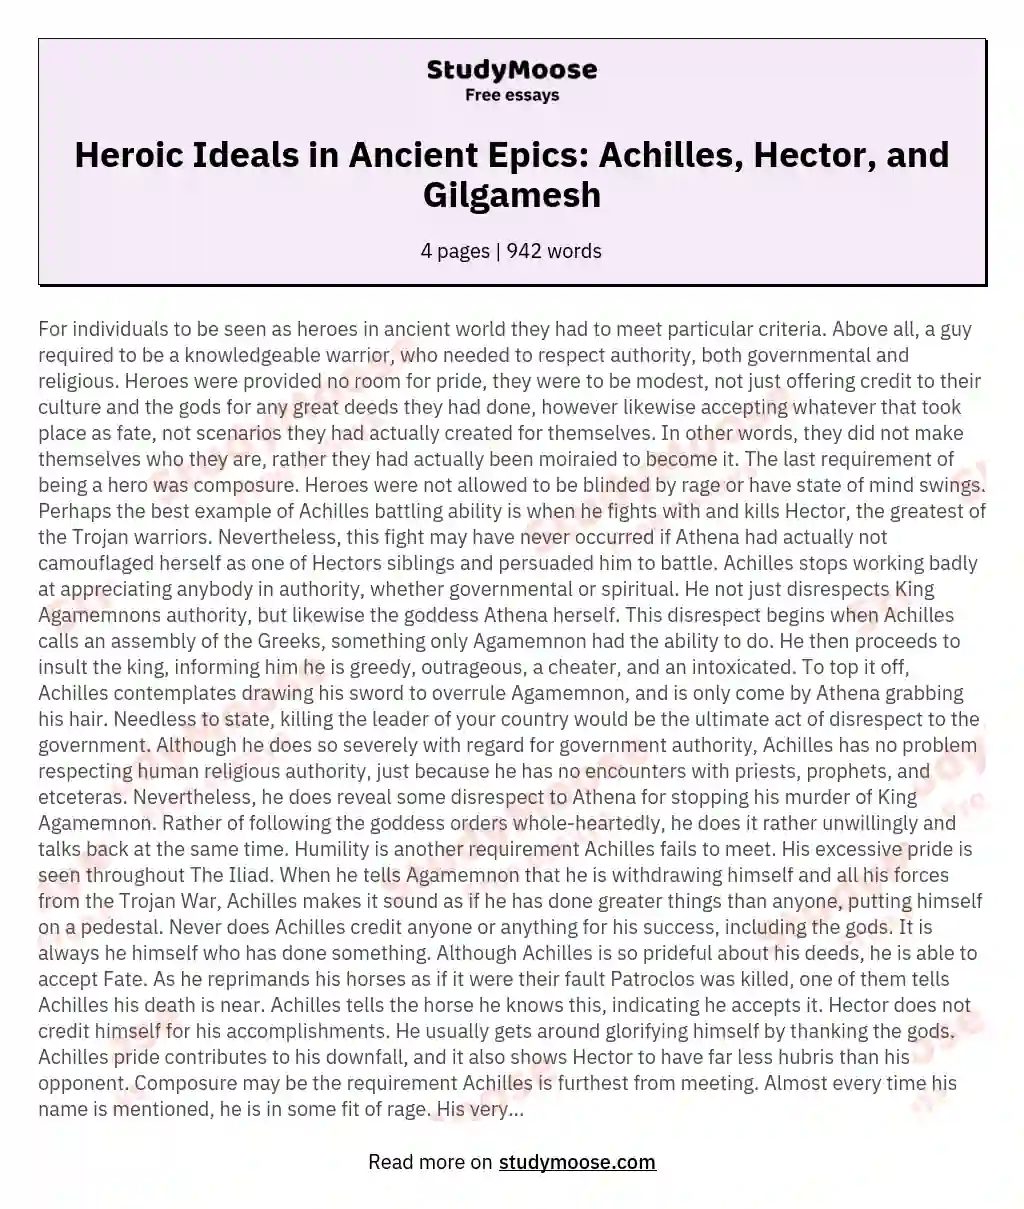 Heroic Ideals in Ancient Epics: Achilles, Hector, and Gilgamesh essay